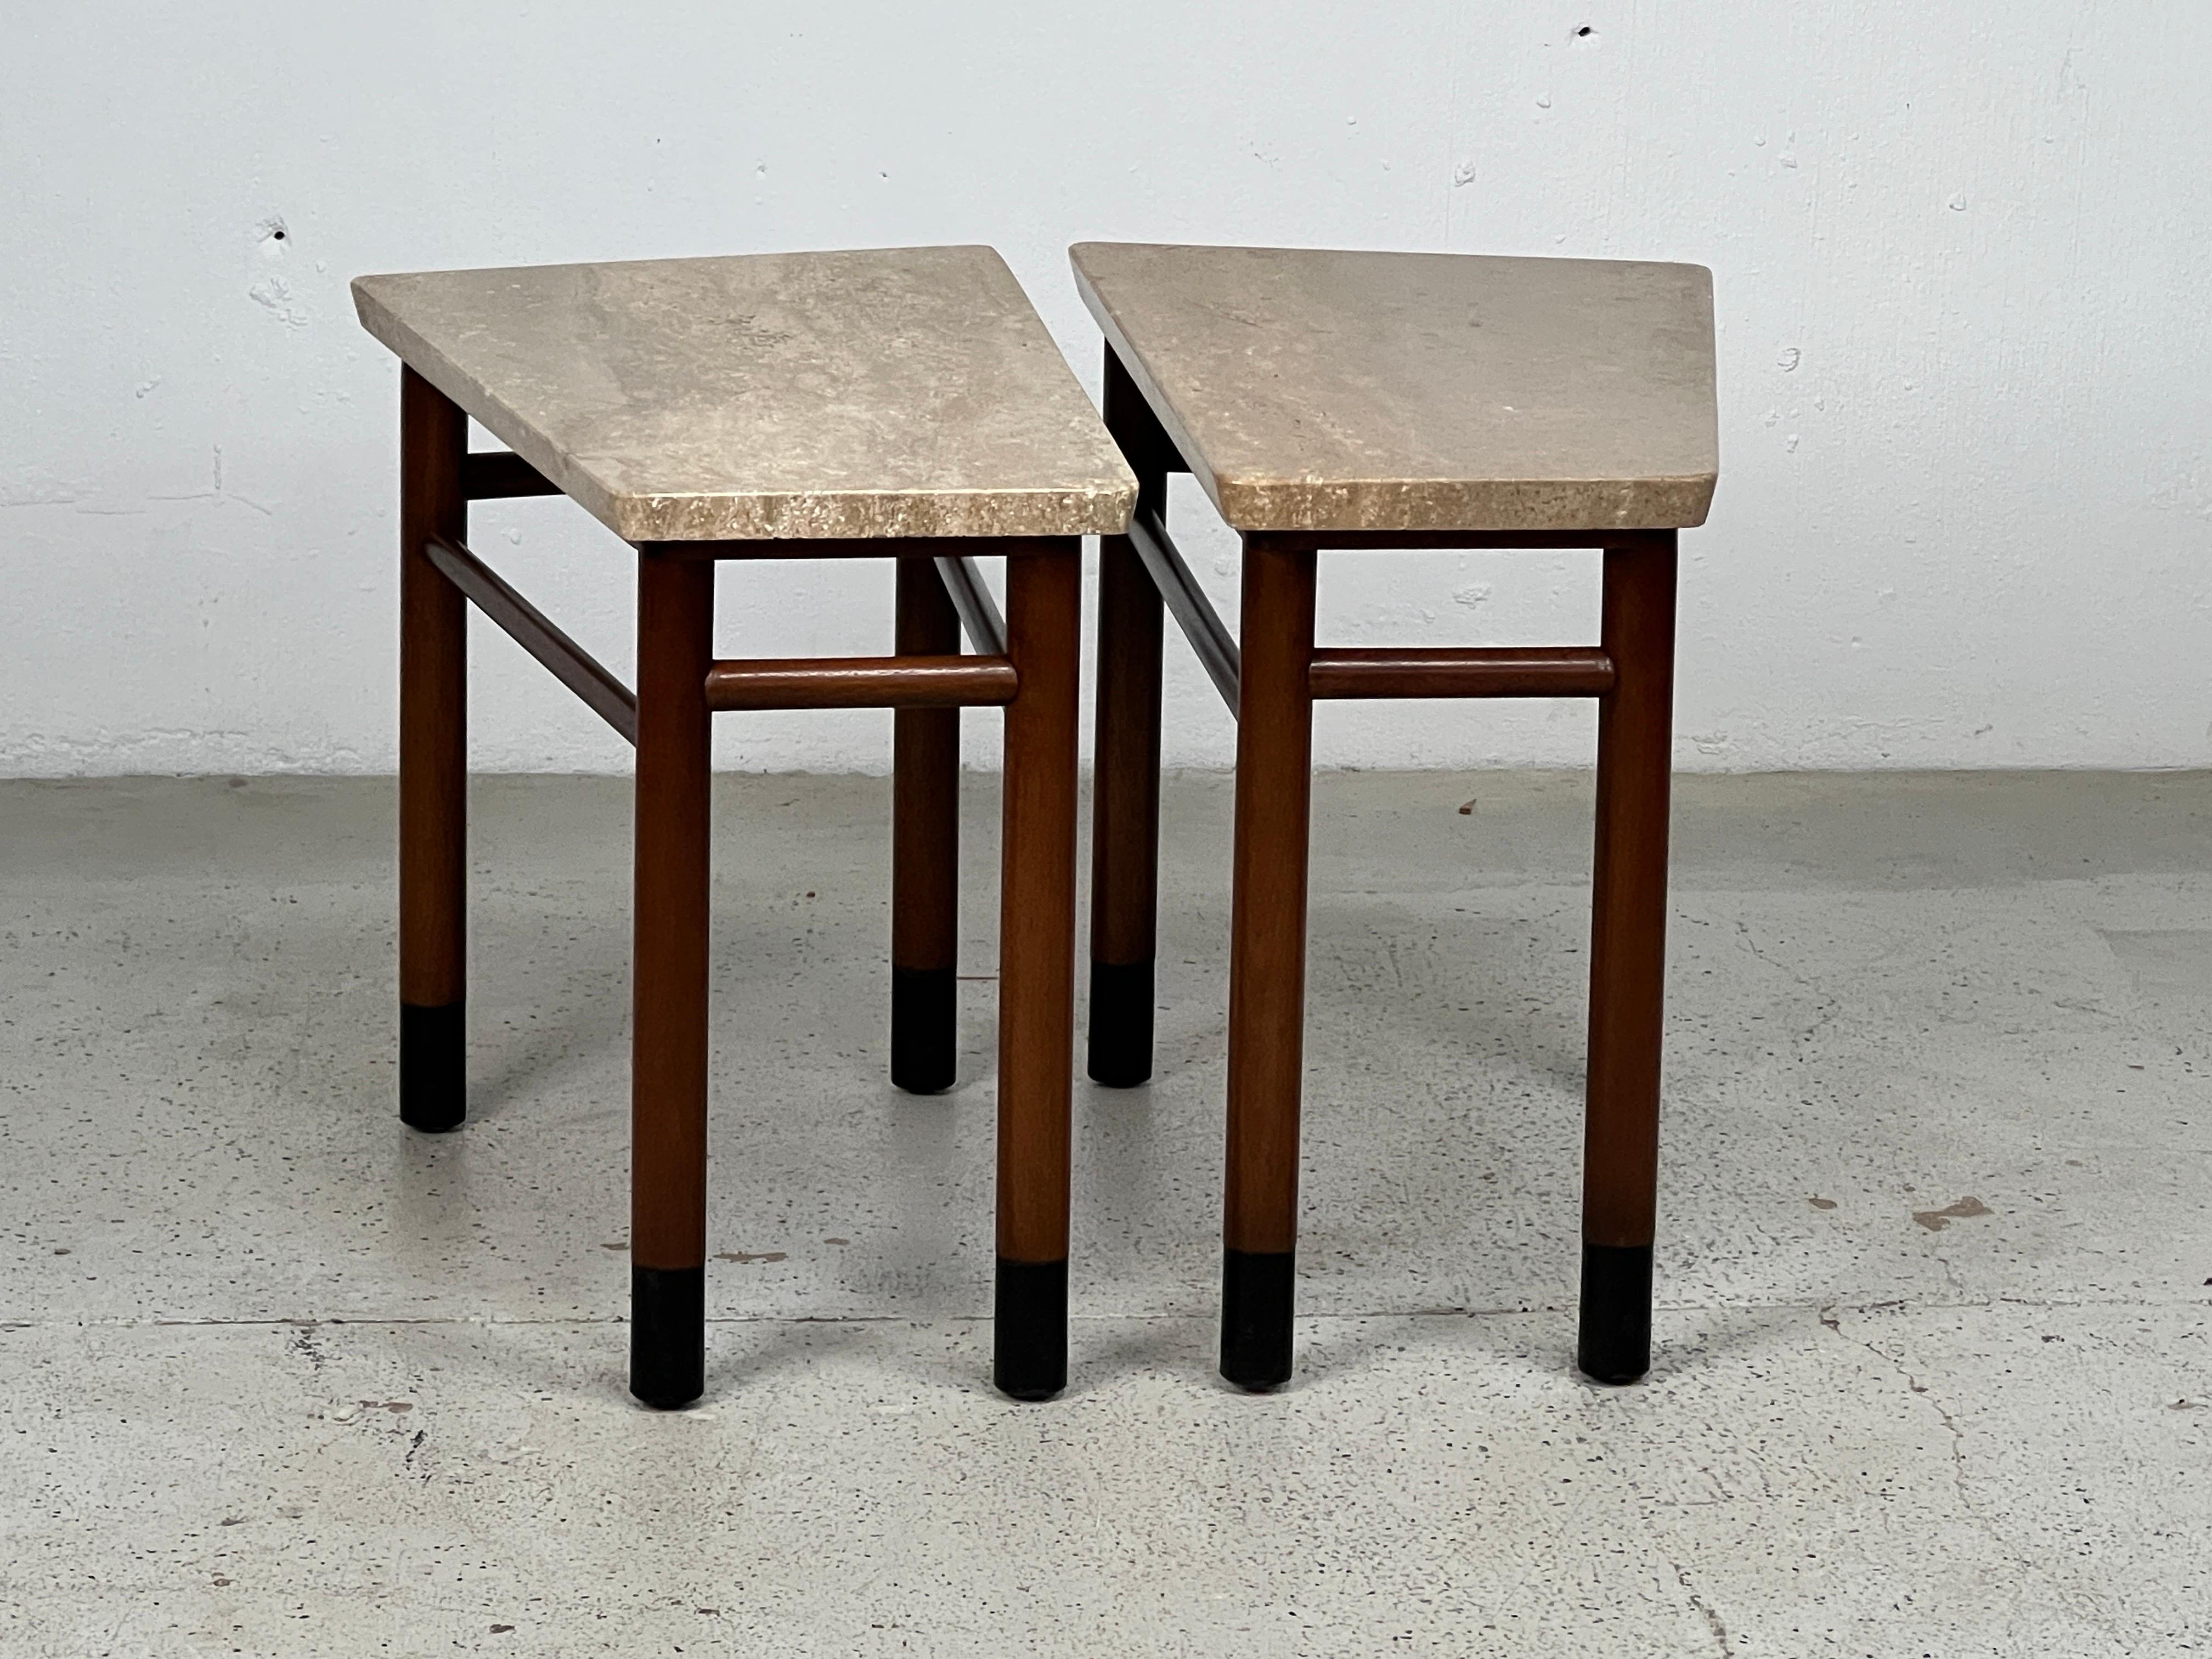 Pair of Wedge Shaped Travertine Tables by Edward Wormley for Dunbar For Sale 8